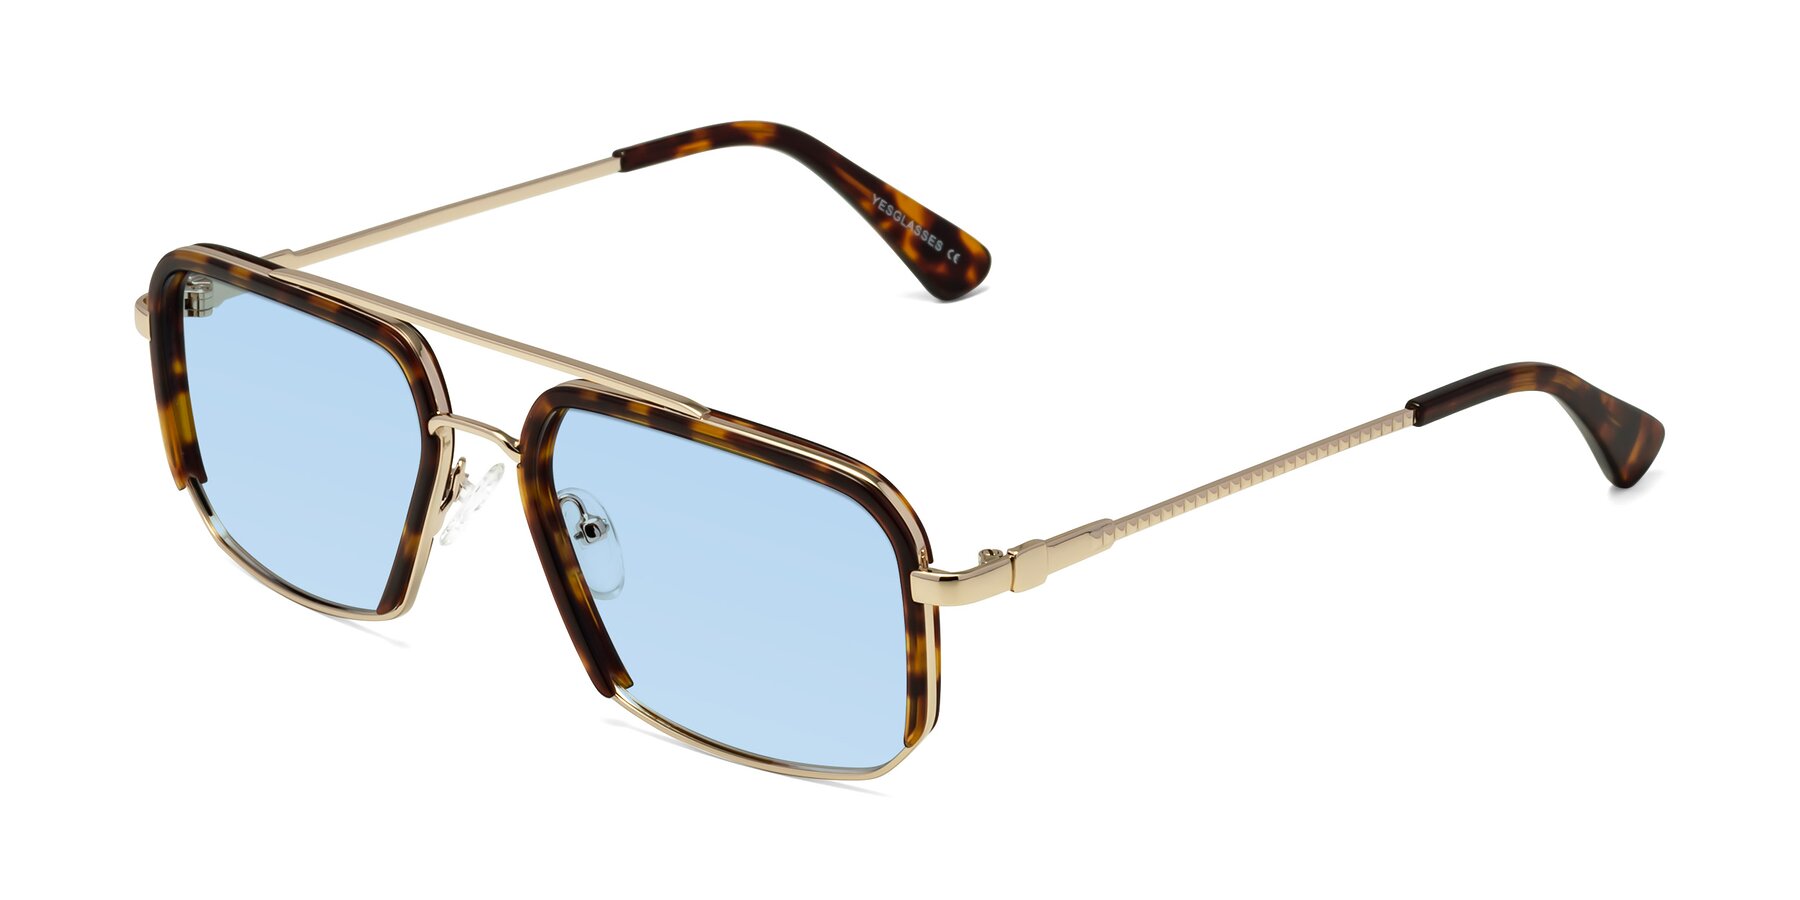 Angle of Dechter in Tortoise-Gold with Light Blue Tinted Lenses